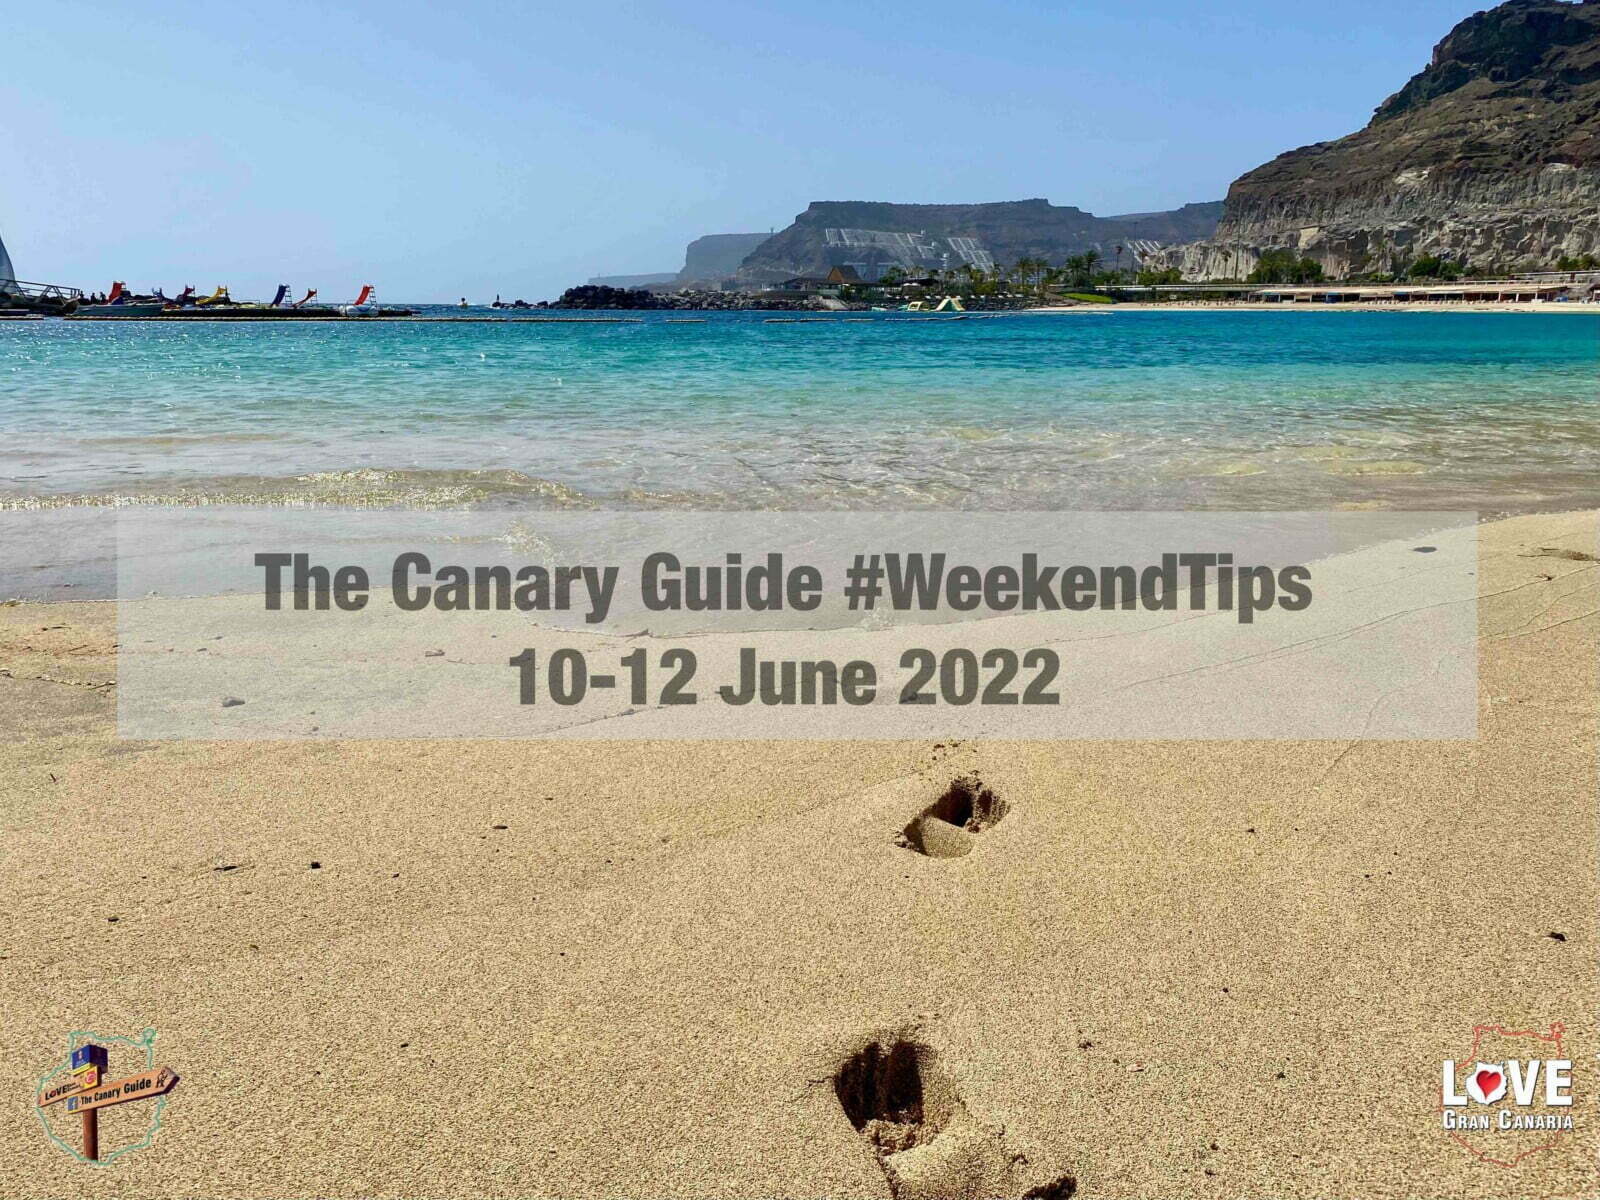 The Canary Guide #WeekendTips 10-12 June 2022